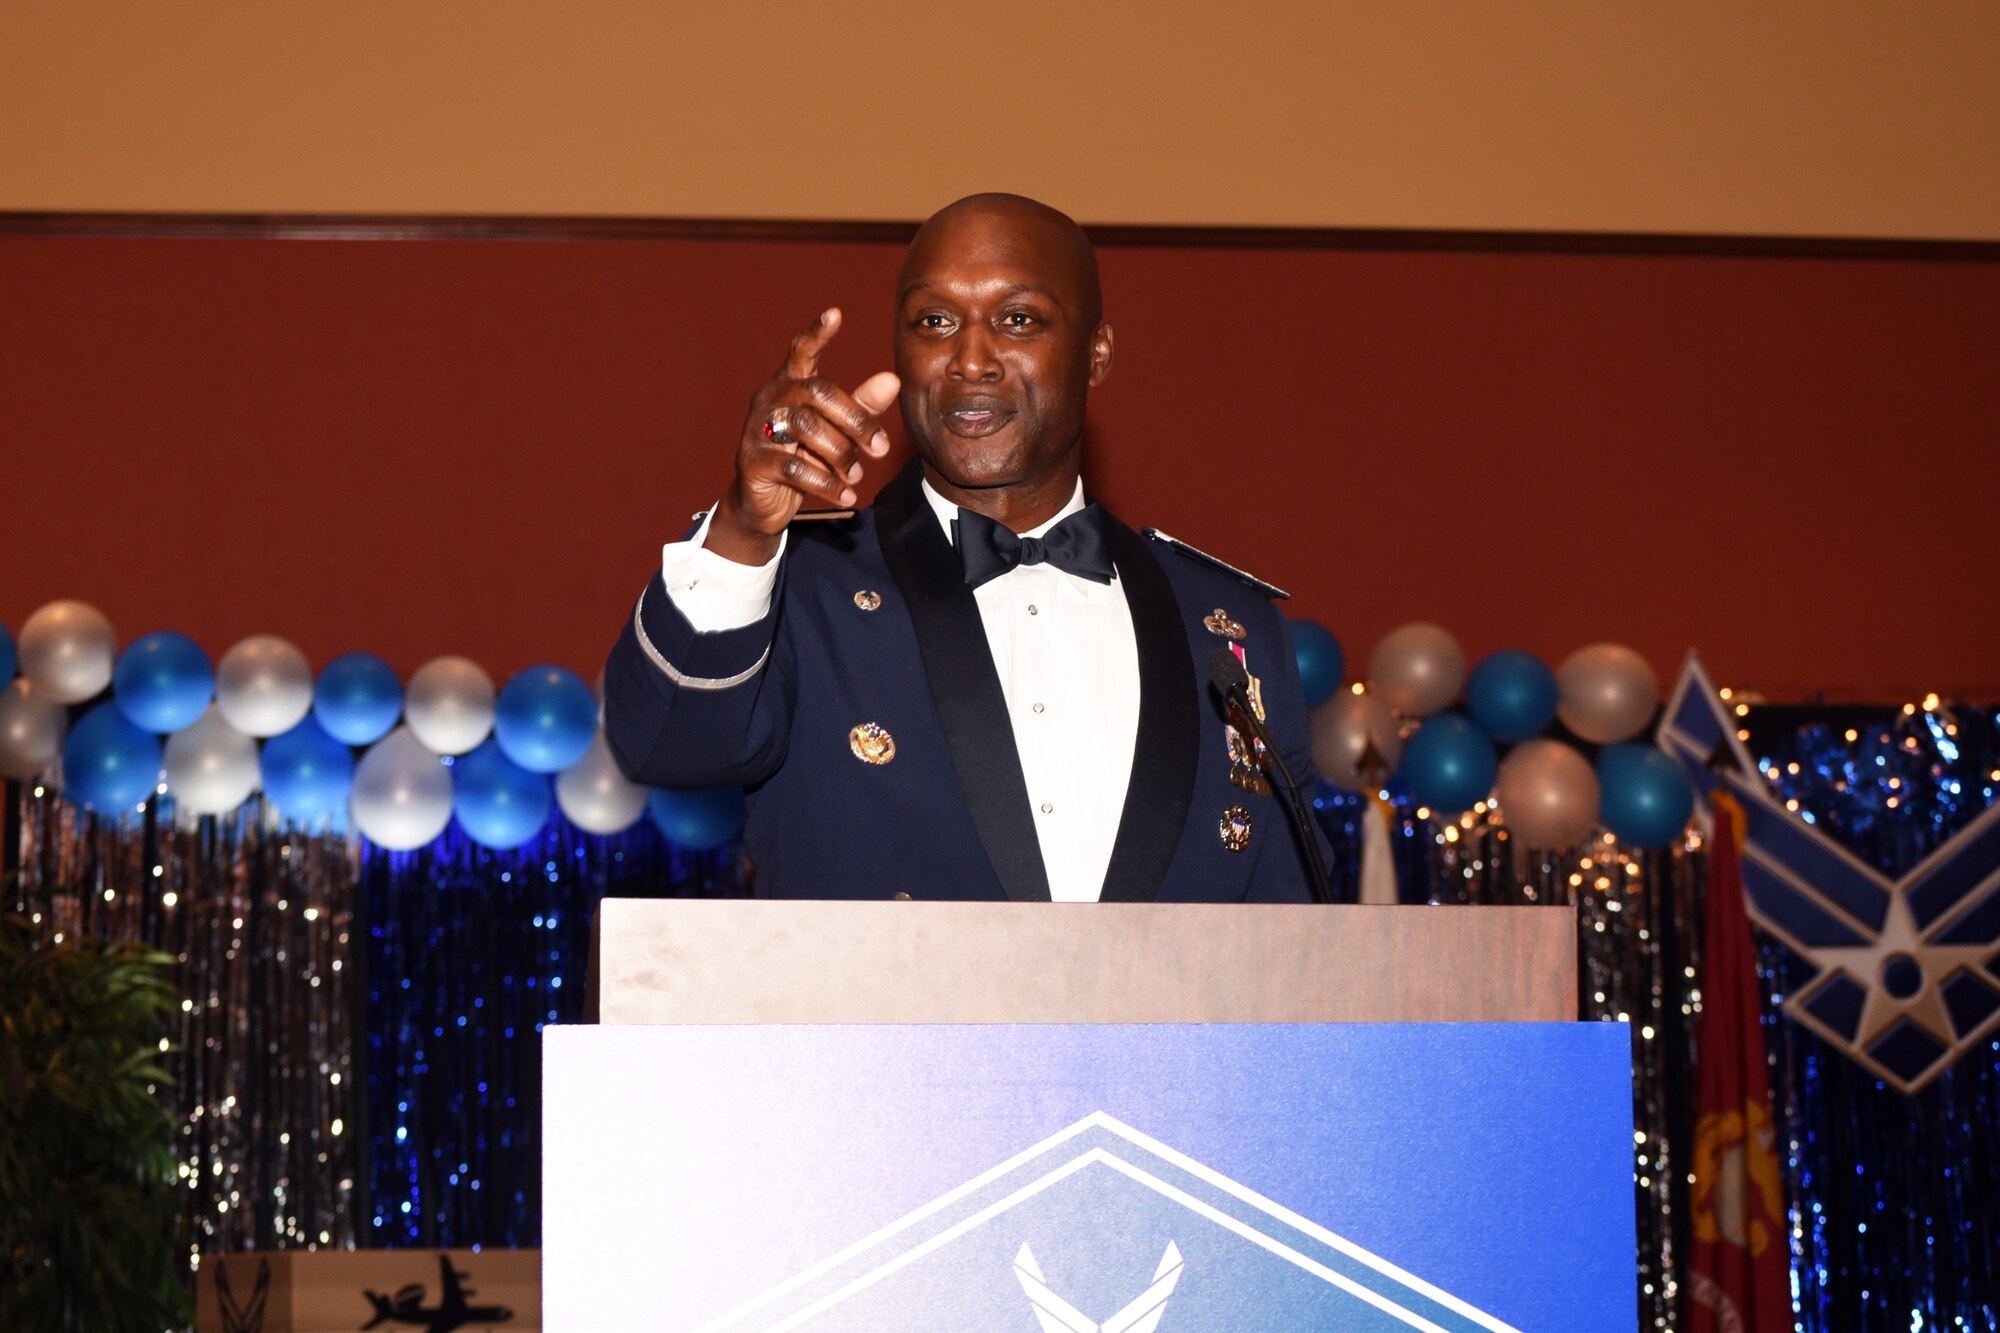 Col. Kenyon Bell, 72nd Air Base Wing commander, thanks everyone for attending this year's Air Force Ball, held on Sept. 16, 2017 at the Embassy Suites in Norman, Oklahoma. This year's ball celebrated the 70th birthday of the Air Force and the 75th anniversary of Tinker Air Force Base.